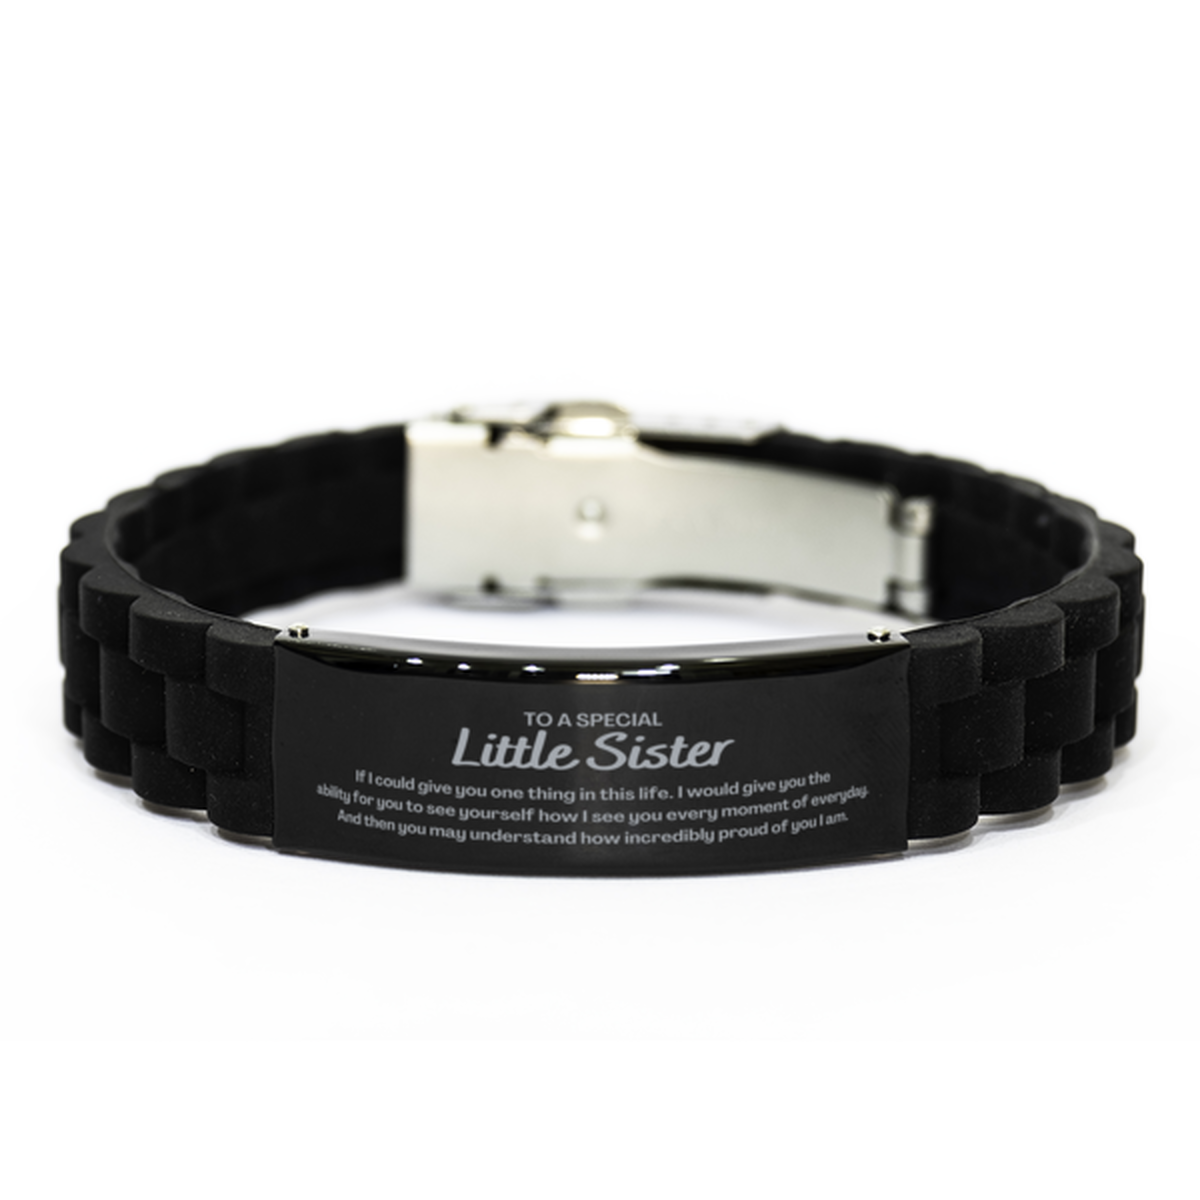 To My Little Sister Black Glidelock Clasp Bracelet, Gifts For Little Sister Engraved, Inspirational Gifts for Christmas Birthday, Epic Gifts for Little Sister To A Special Little Sister how incredibly proud of you I am